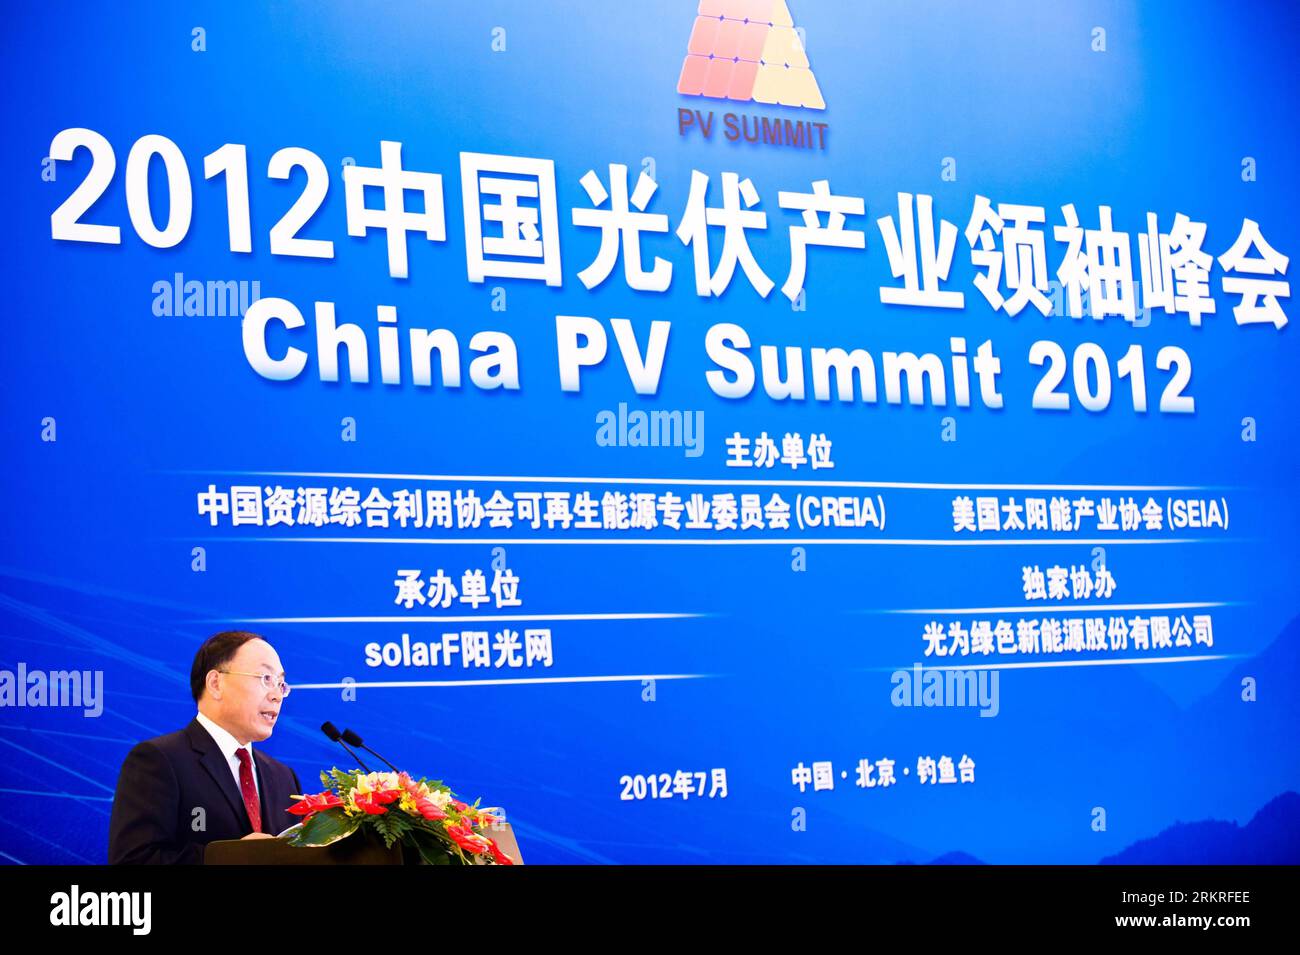 Bildnummer: 58232422  Datum: 12.07.2012  Copyright: imago/Xinhua (120712) -- BEIJING, July 12, 2012 (Xinhua) -- Shi Lishan, deputy director of the Department of New and Renewable Energy at the National Energy Administration, addresses the China PV Summit 2012 in Beijing, capital of China, July 12, 2012. The China PV Summit 2012, co-sponsored by Chinese Renewable Energy Industries Association (CREIA) and Solar Energy Industries Association (SEIA), was held here on Thursday to further explore new opportunities of the photovoltaic industry and to address new challenges the PV industry is now faci Stock Photo